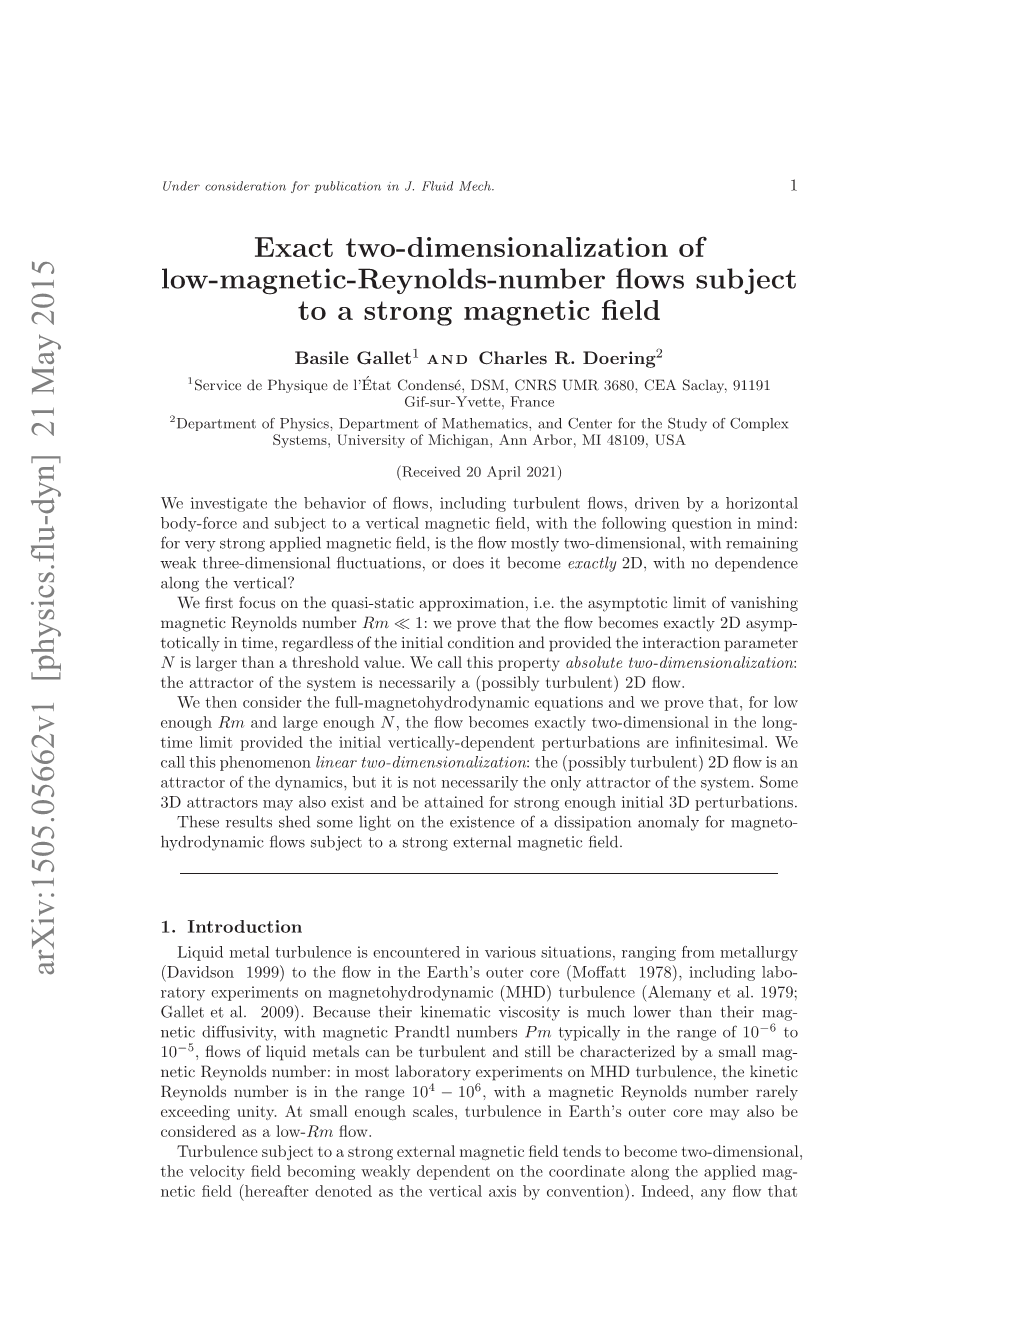 Exact Two-Dimensionalization of Low-Magnetic-Reynolds-Number